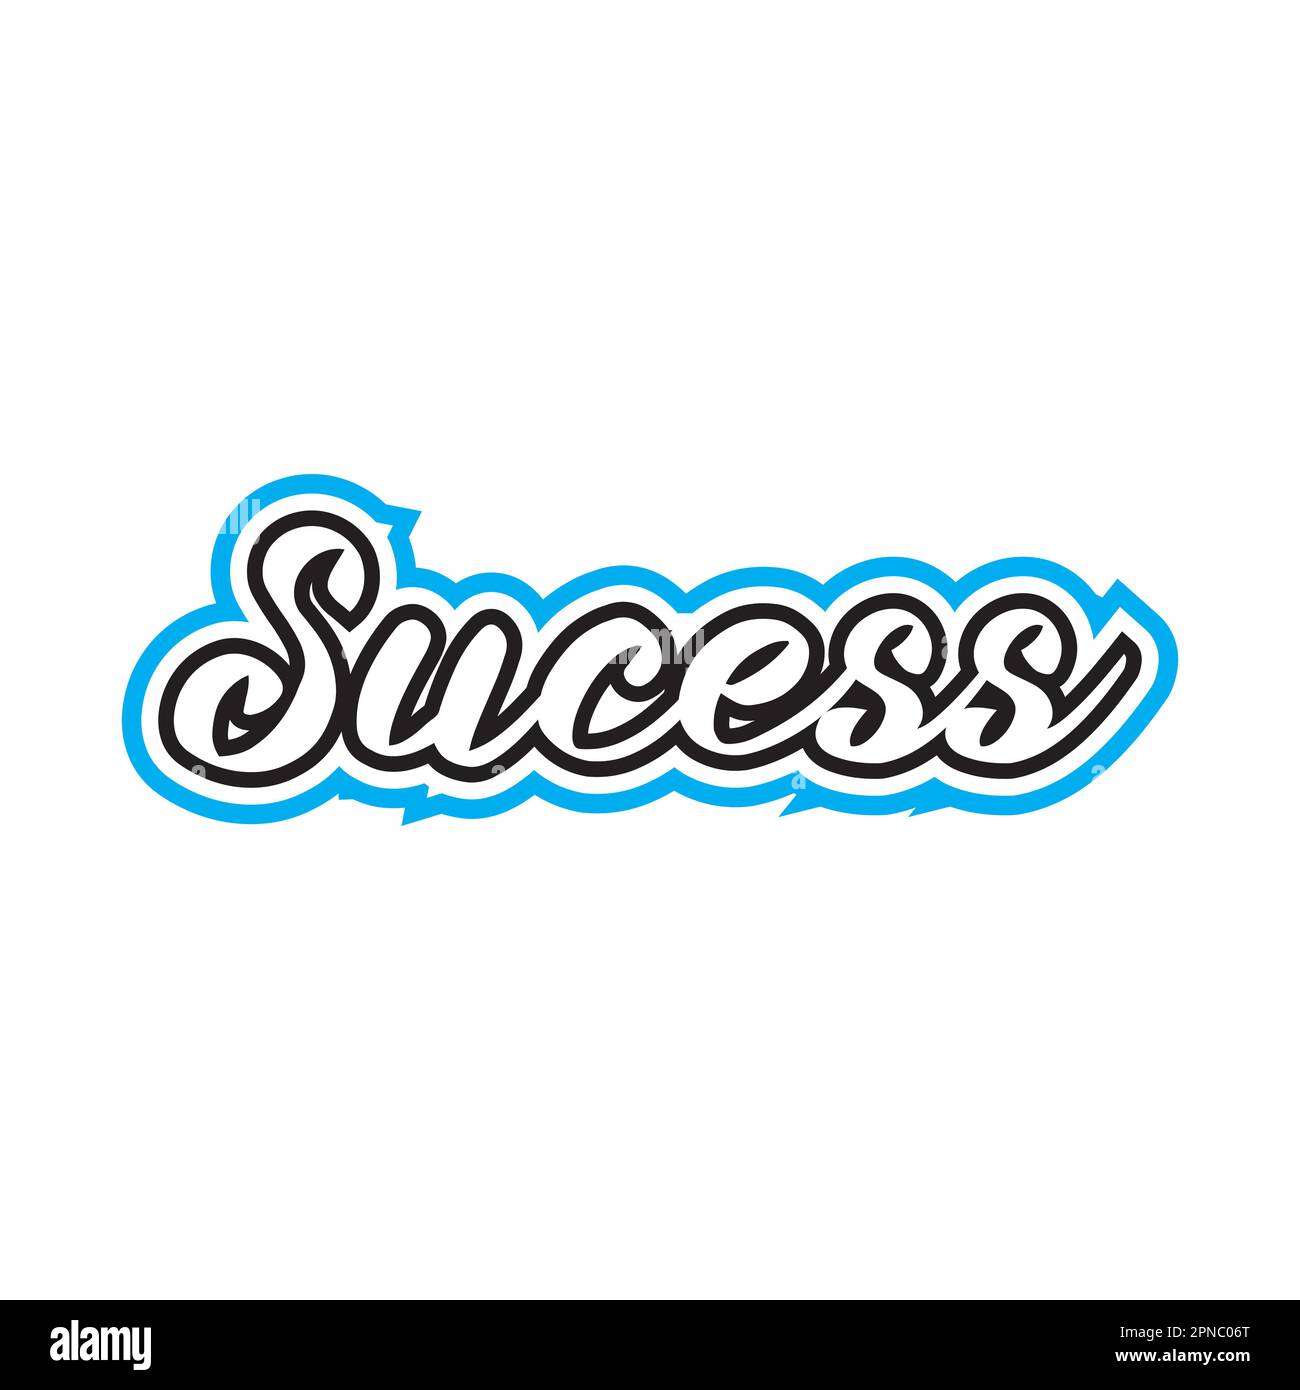 Success inspirational lettering colorful style text typography t shirt design on white background Stock Vector